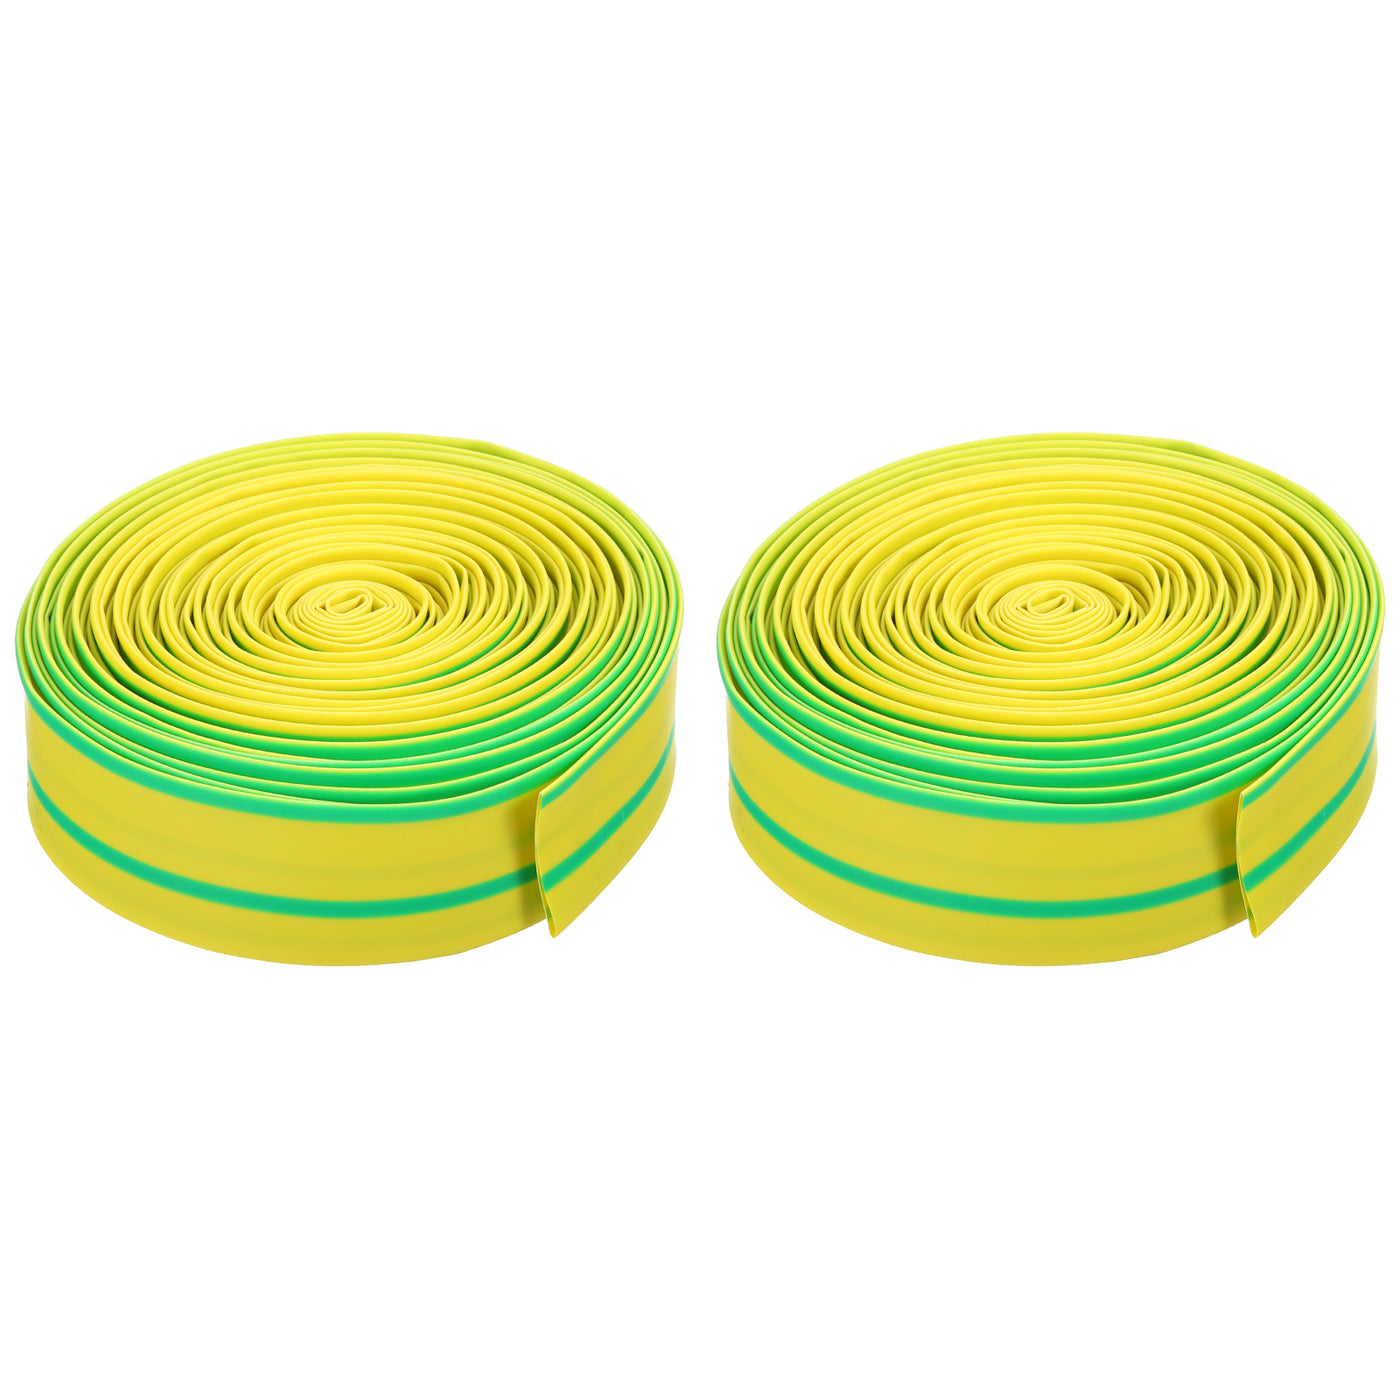 Harfington 2pcs 20mm Dia 33ft Heat Shrink Tubing 2:1 Electric Insulation Wire Shrink Wrap Tubing for Industrial Electrical Cable Wire